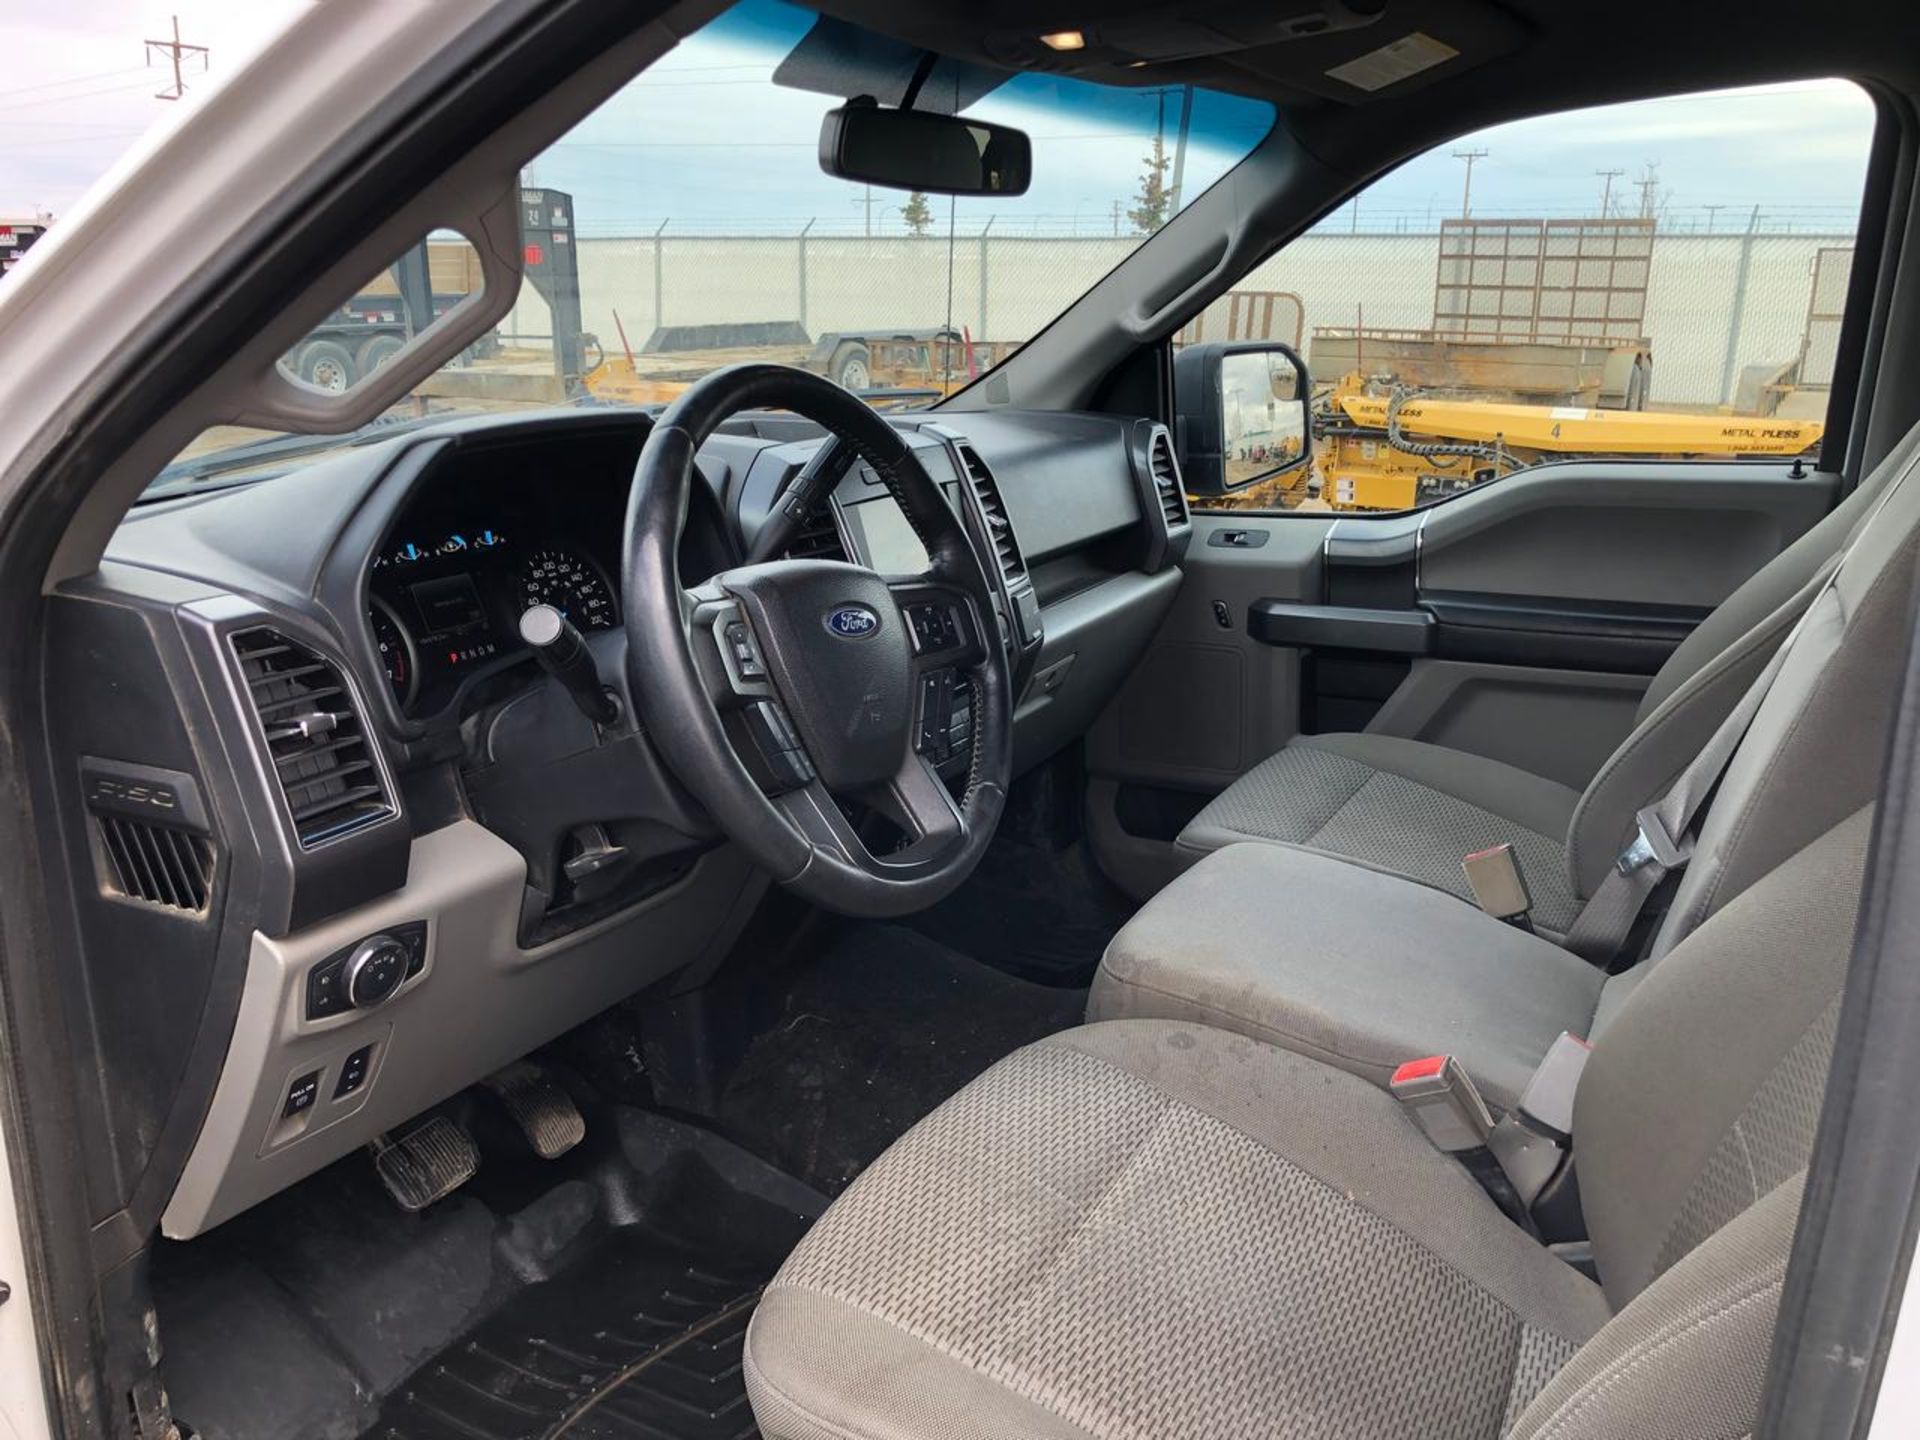 2018 Ford F150 Pick-up Truck - Image 10 of 13